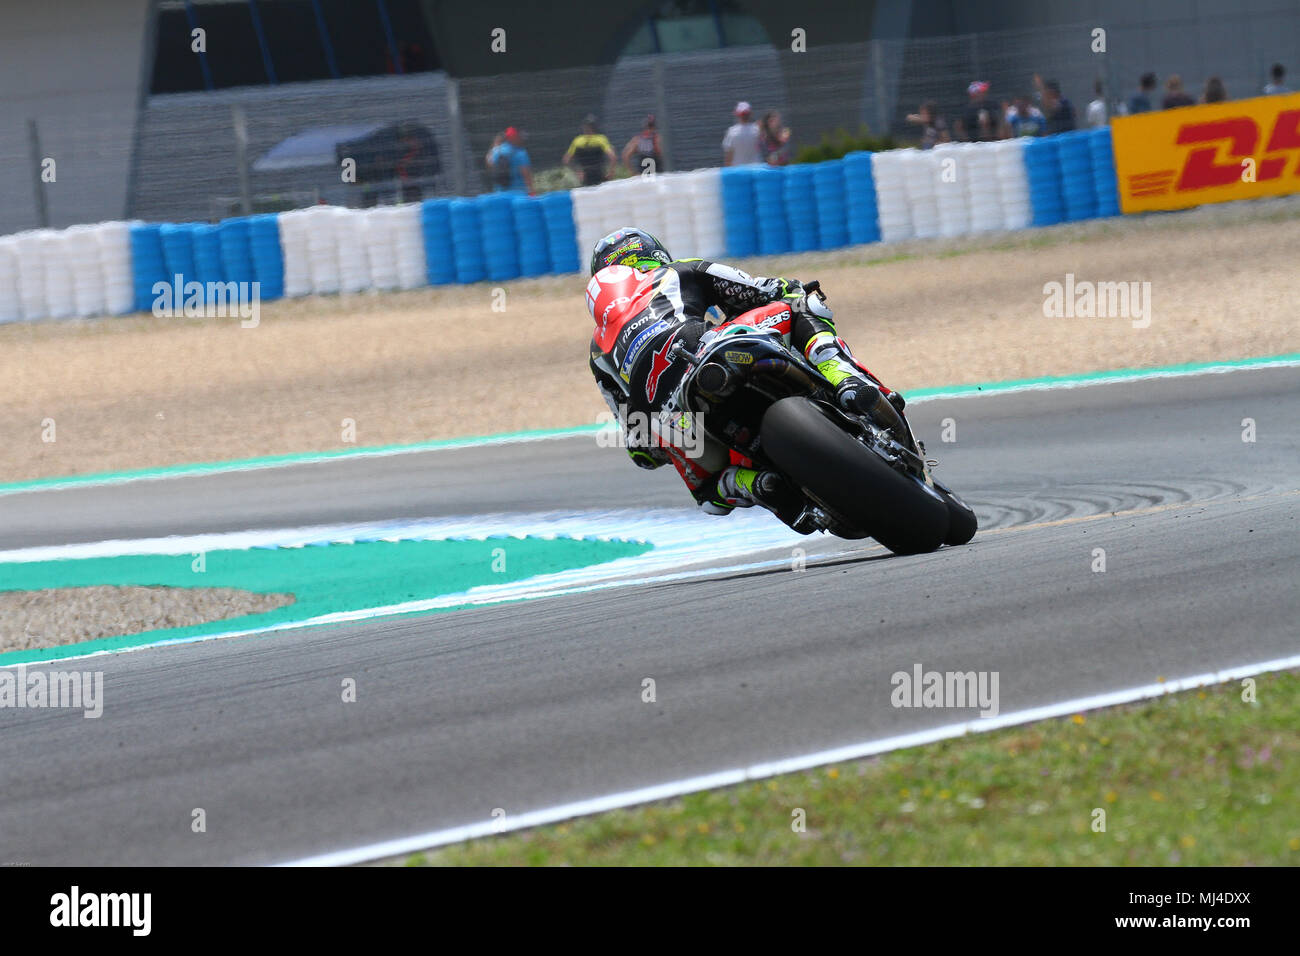 Jerez Angel Nieto circuit, Spain. 4th May, 2018. GBR 35 Cal Crutchlow free practice friday 4th may 2018 motoGP circuit Jerez Angel Nieto Credit: Javier Galvez/Alamy Live News Stock Photo